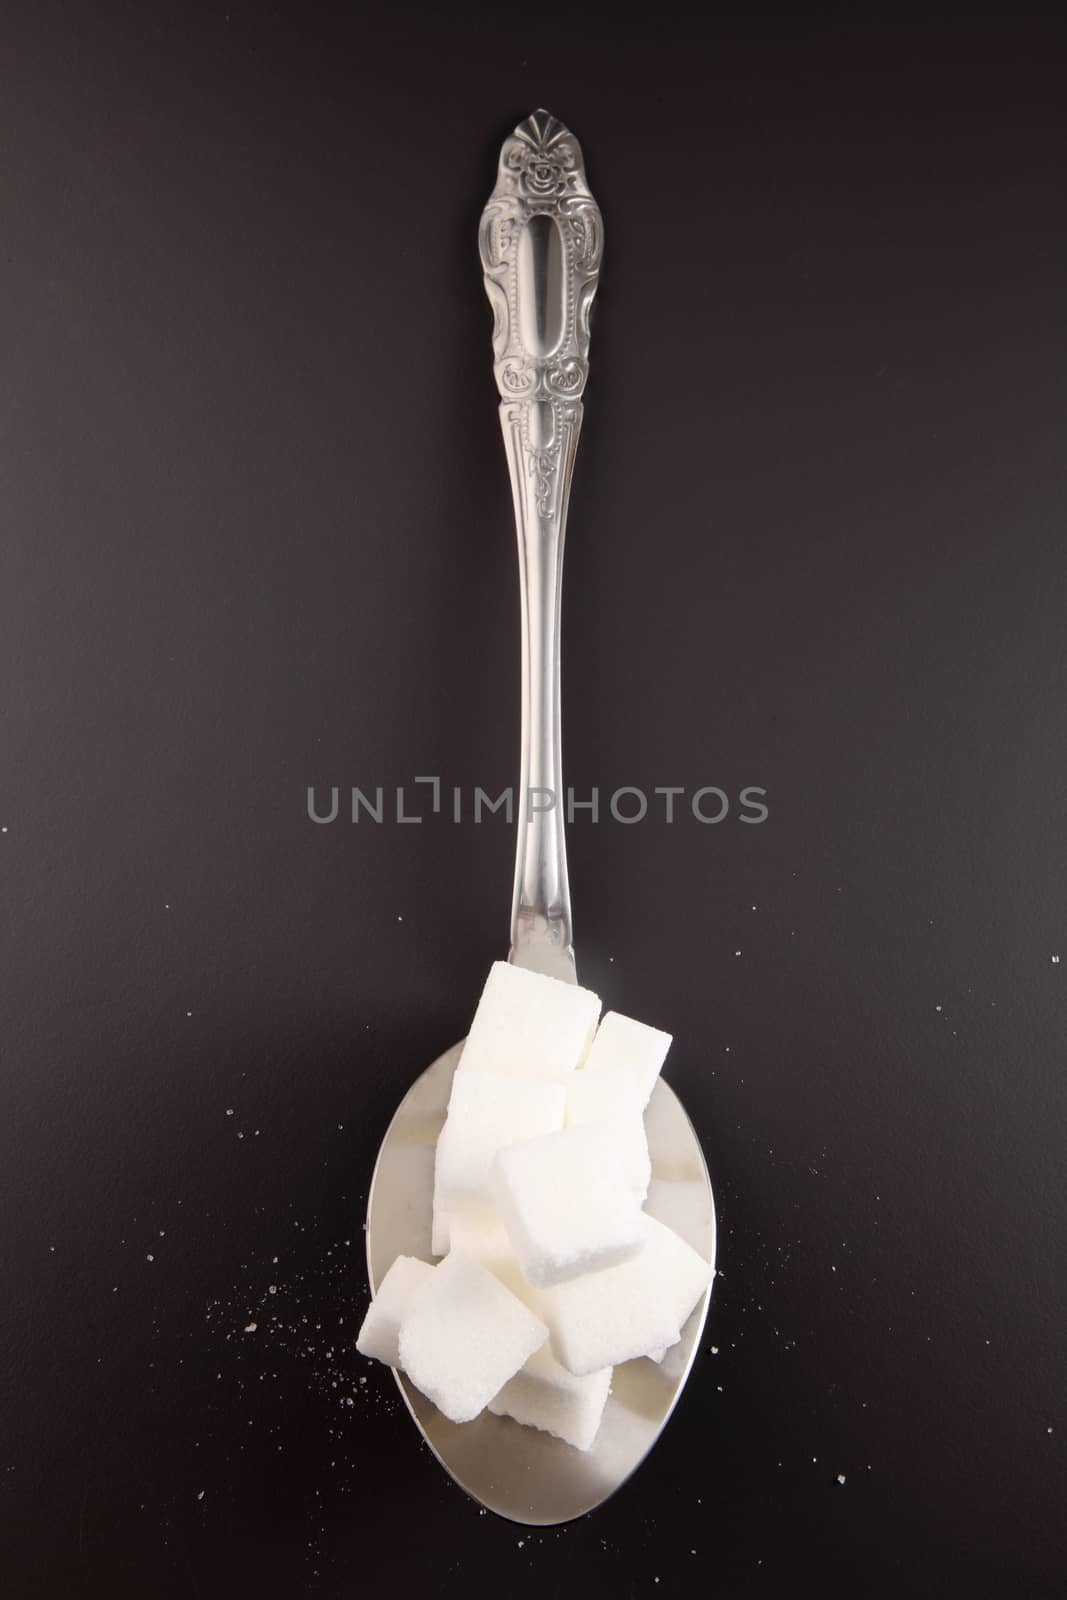 big or super size spoon with pile of cube white sugar